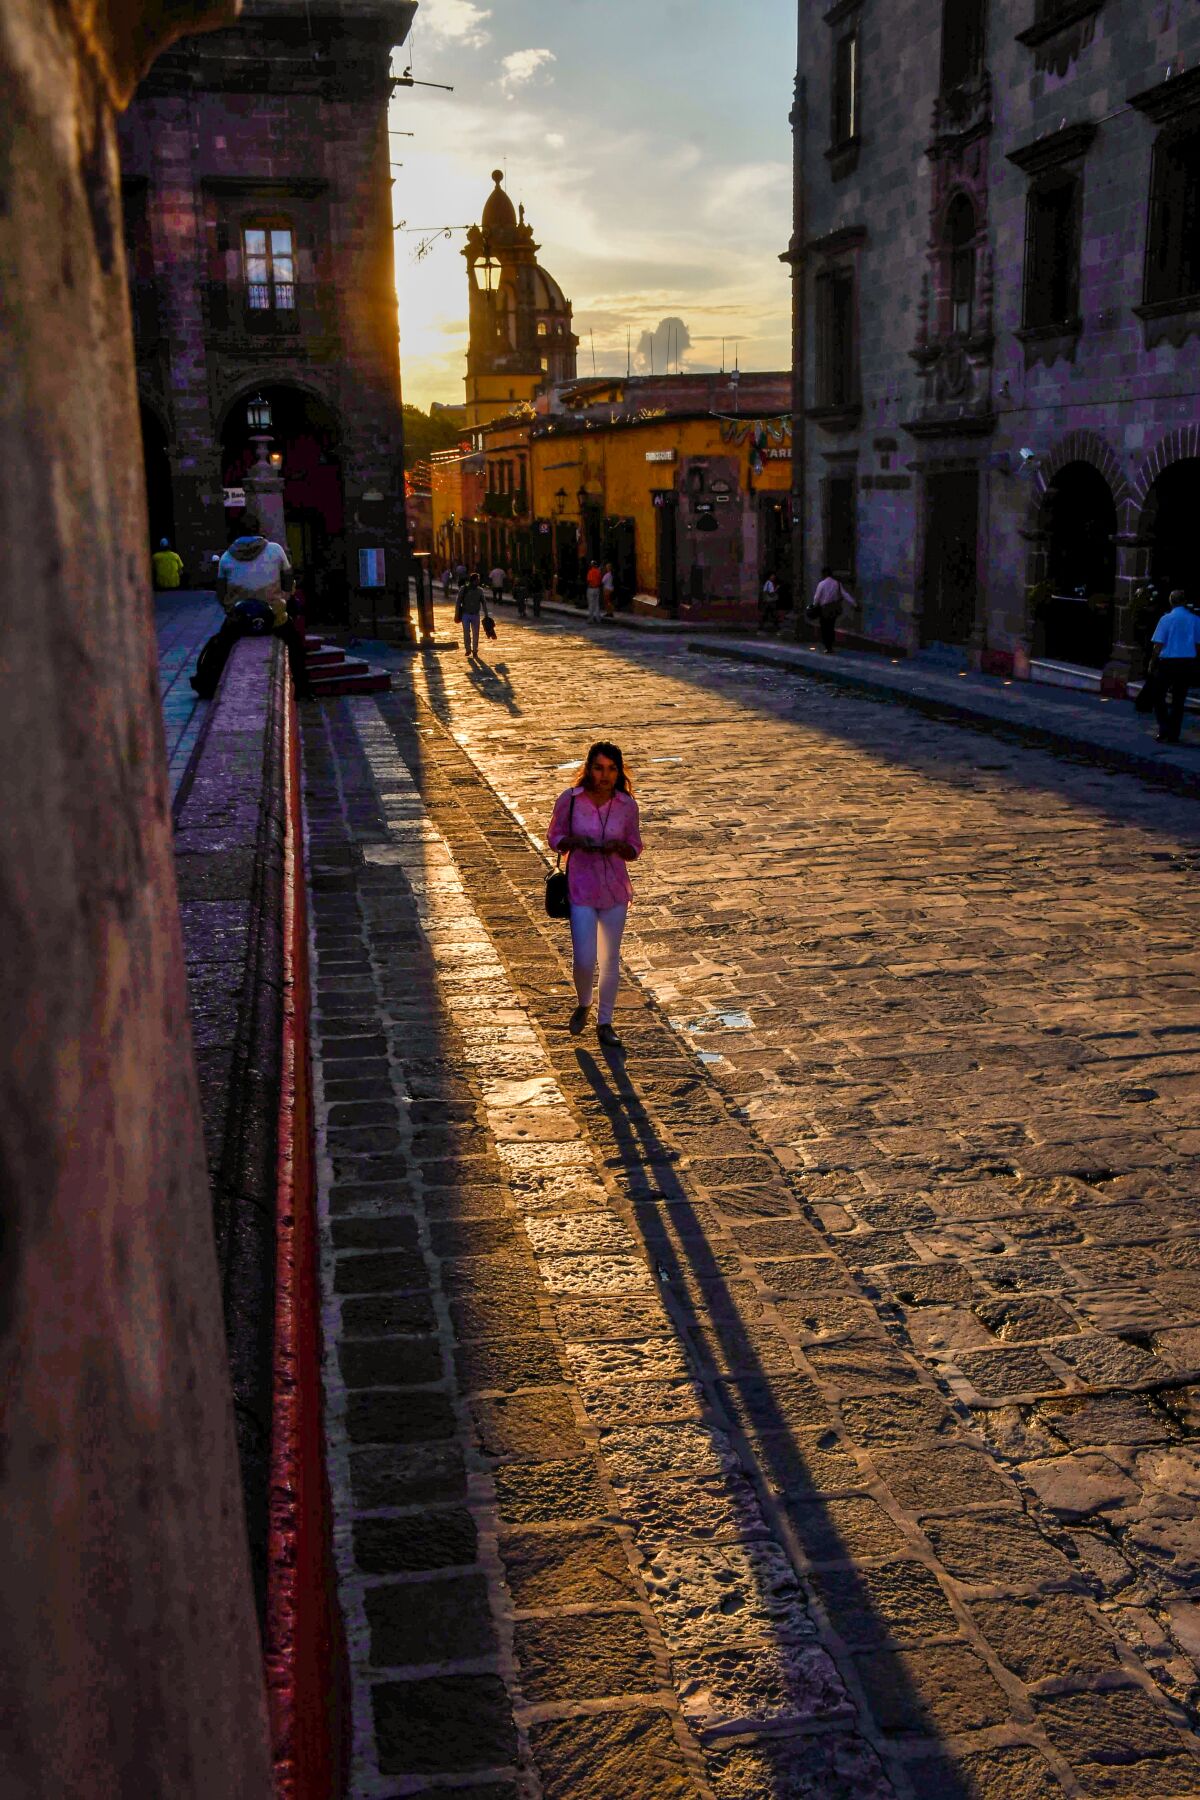 Sunset on Calle Canal near El Jardin, the central plaza of San Miguel de Allende